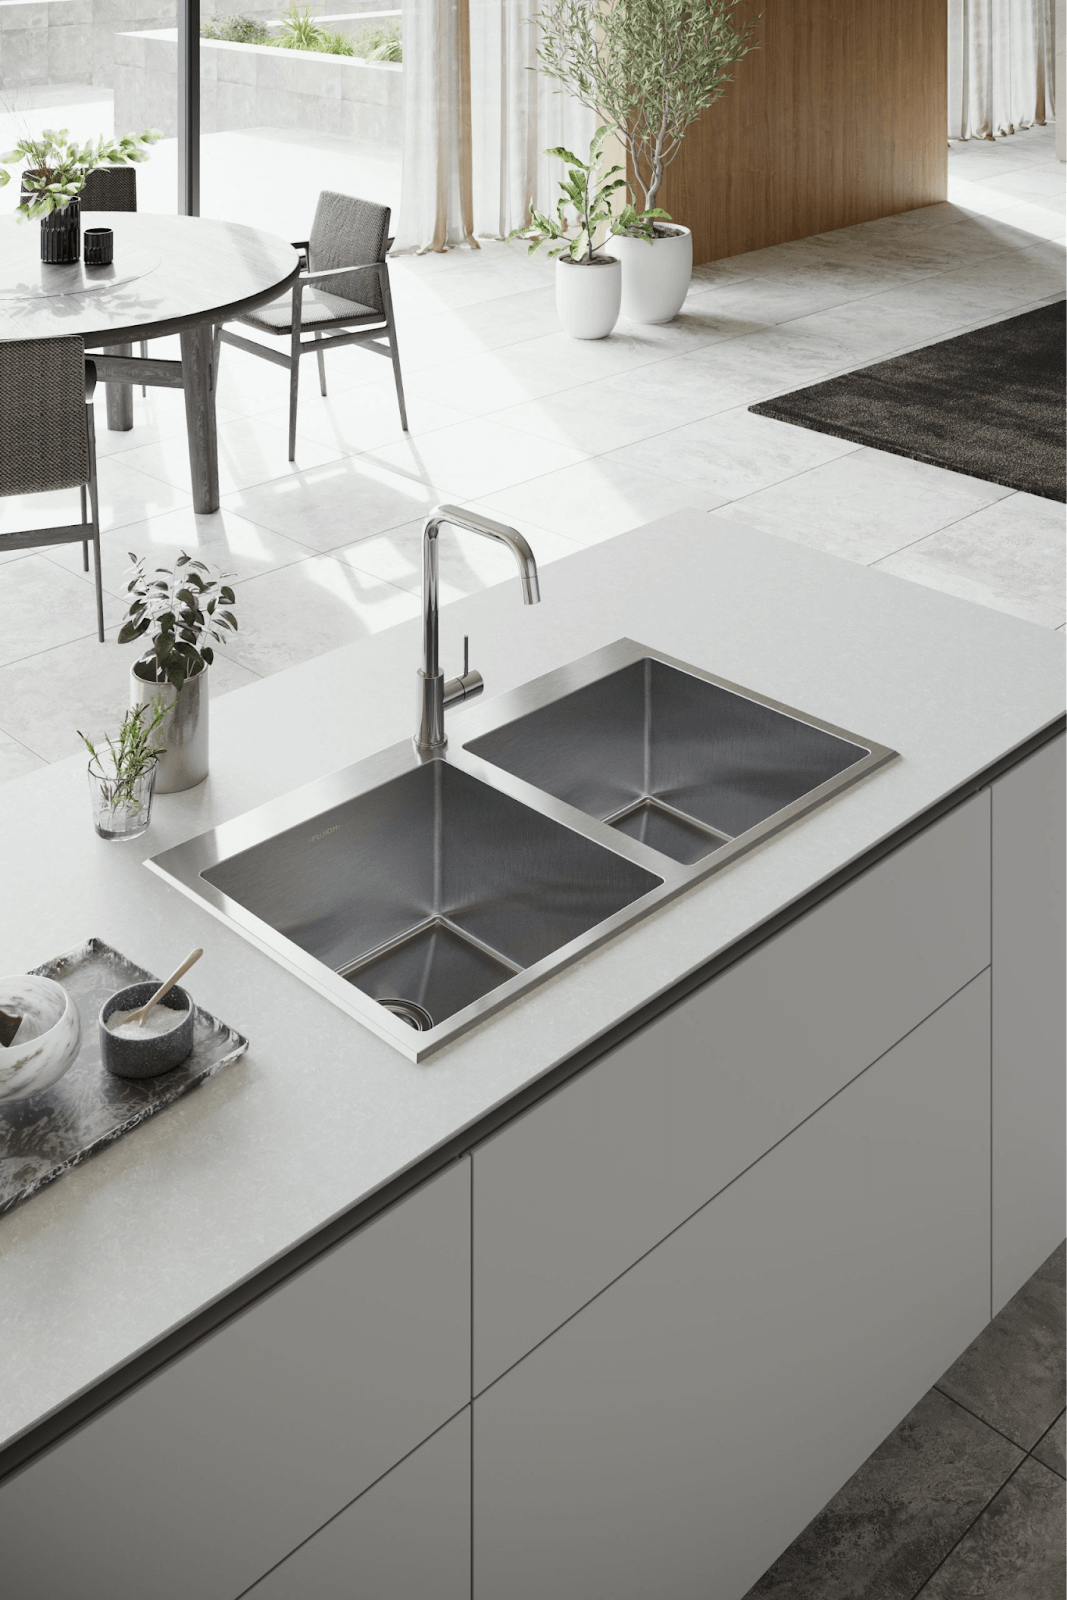 What Are the Pros and Cons of Top-Mount Sinks?